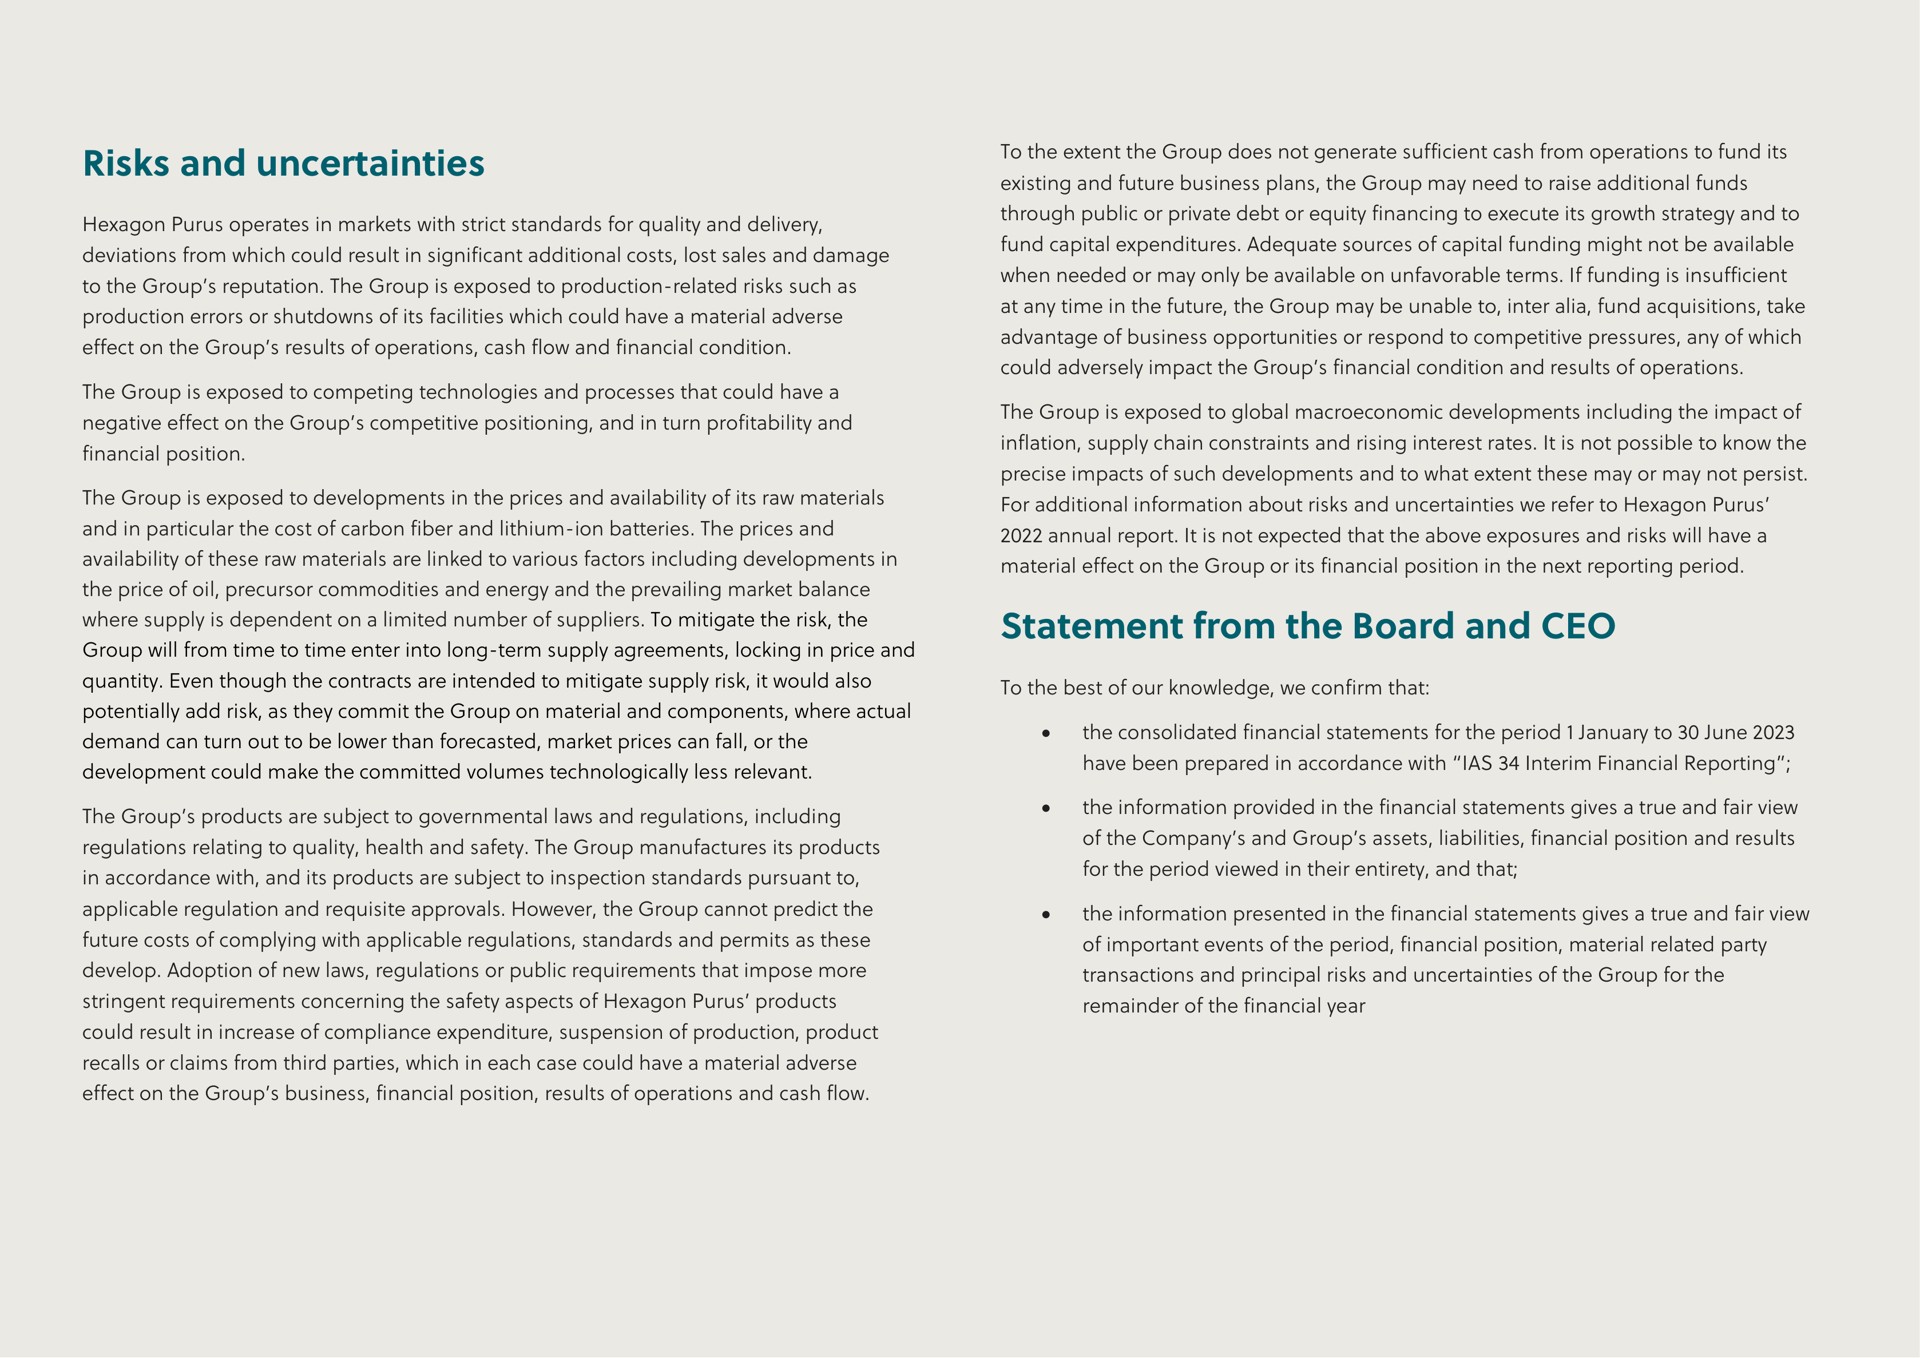 risks and uncertainties statement from the board and group is exposed to developments in prices availability of its raw materials availability of these raw materials are linked to various factors including developments in where supply is dependent on a limited number of suppliers to mitigate risk material effect on group or its financial position in next reporting period to best of our knowledge we confirm that | Hexagon Purus